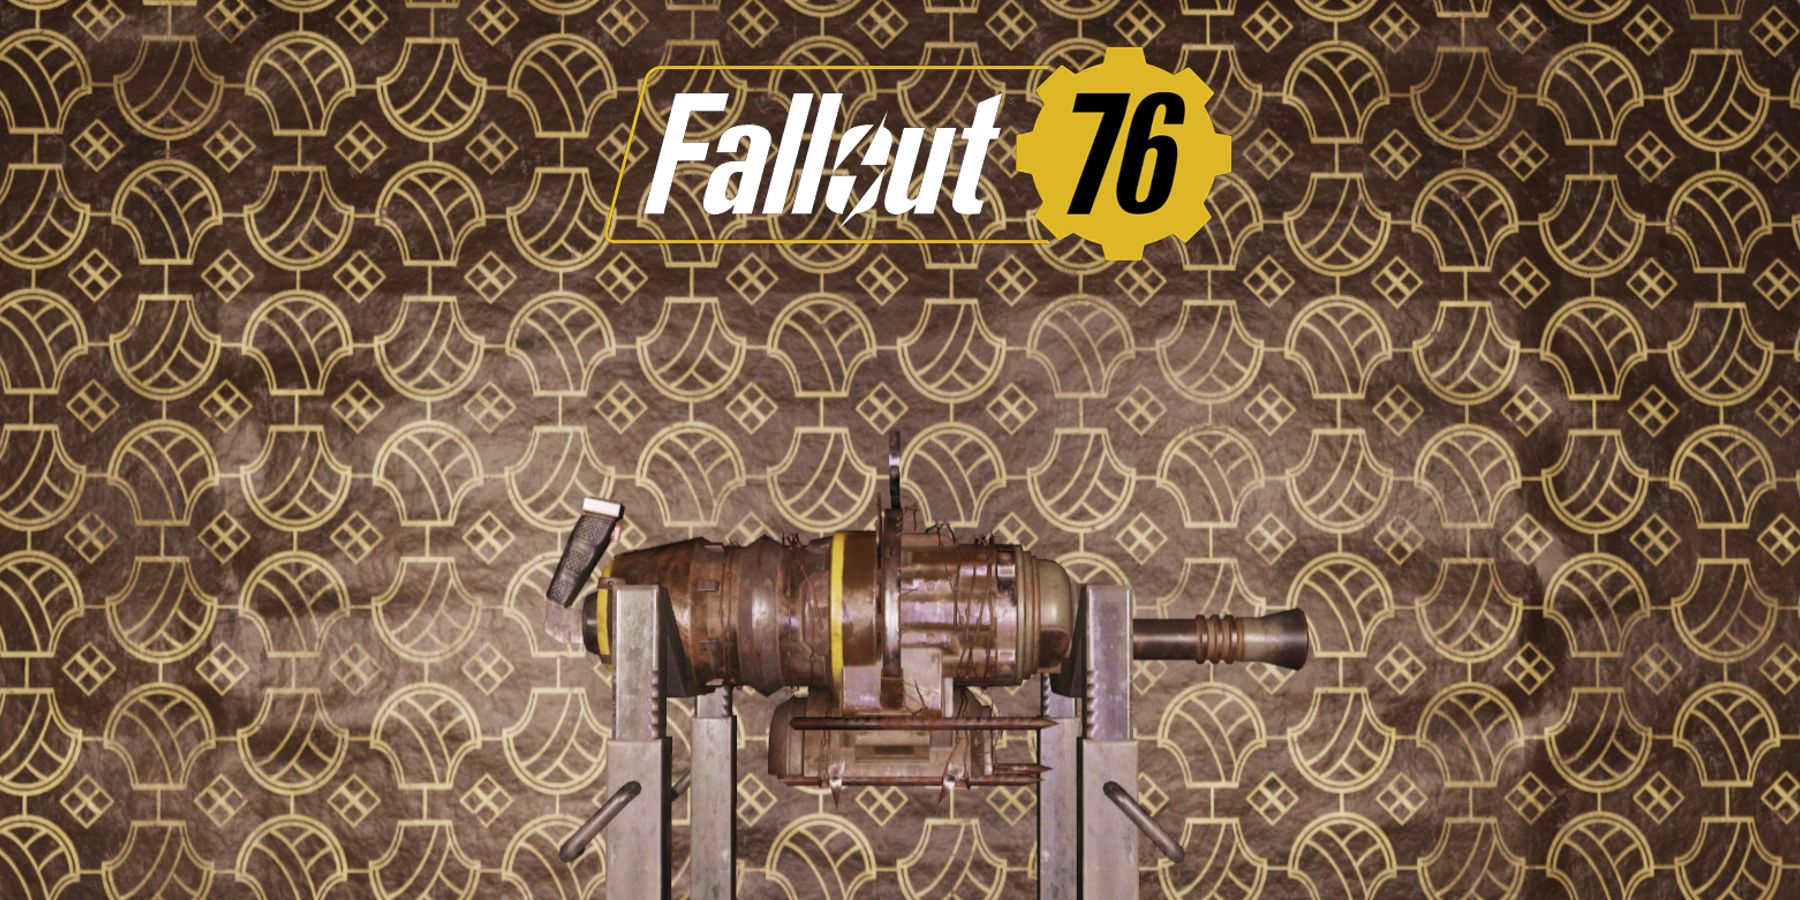 Fallout 76 Pepper Shaker Legendary Weapon on CAMP Display Rack